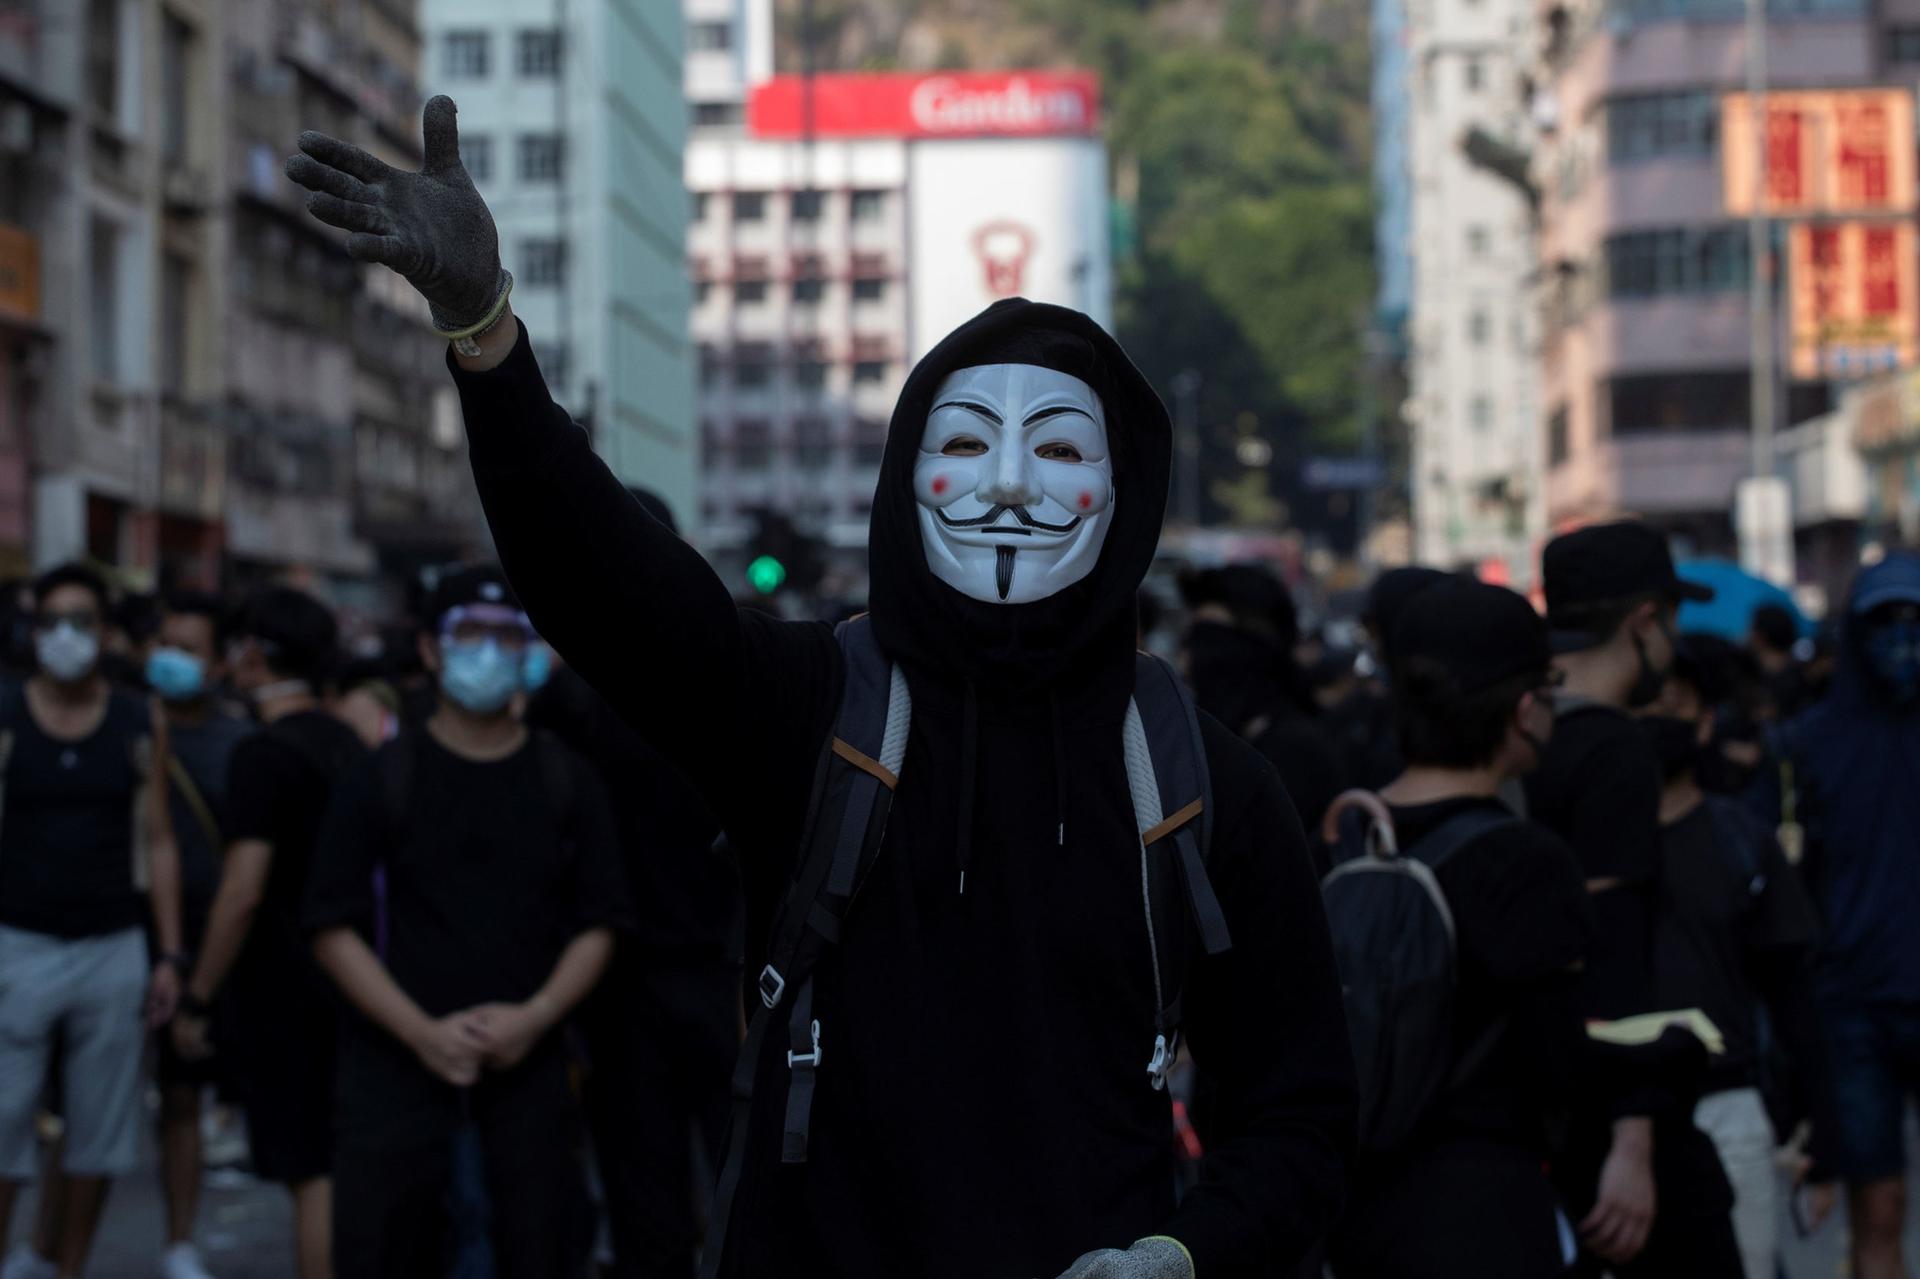 A person is shown center frame wearing a Guy Fawkes maks with their right raised hand in the air.